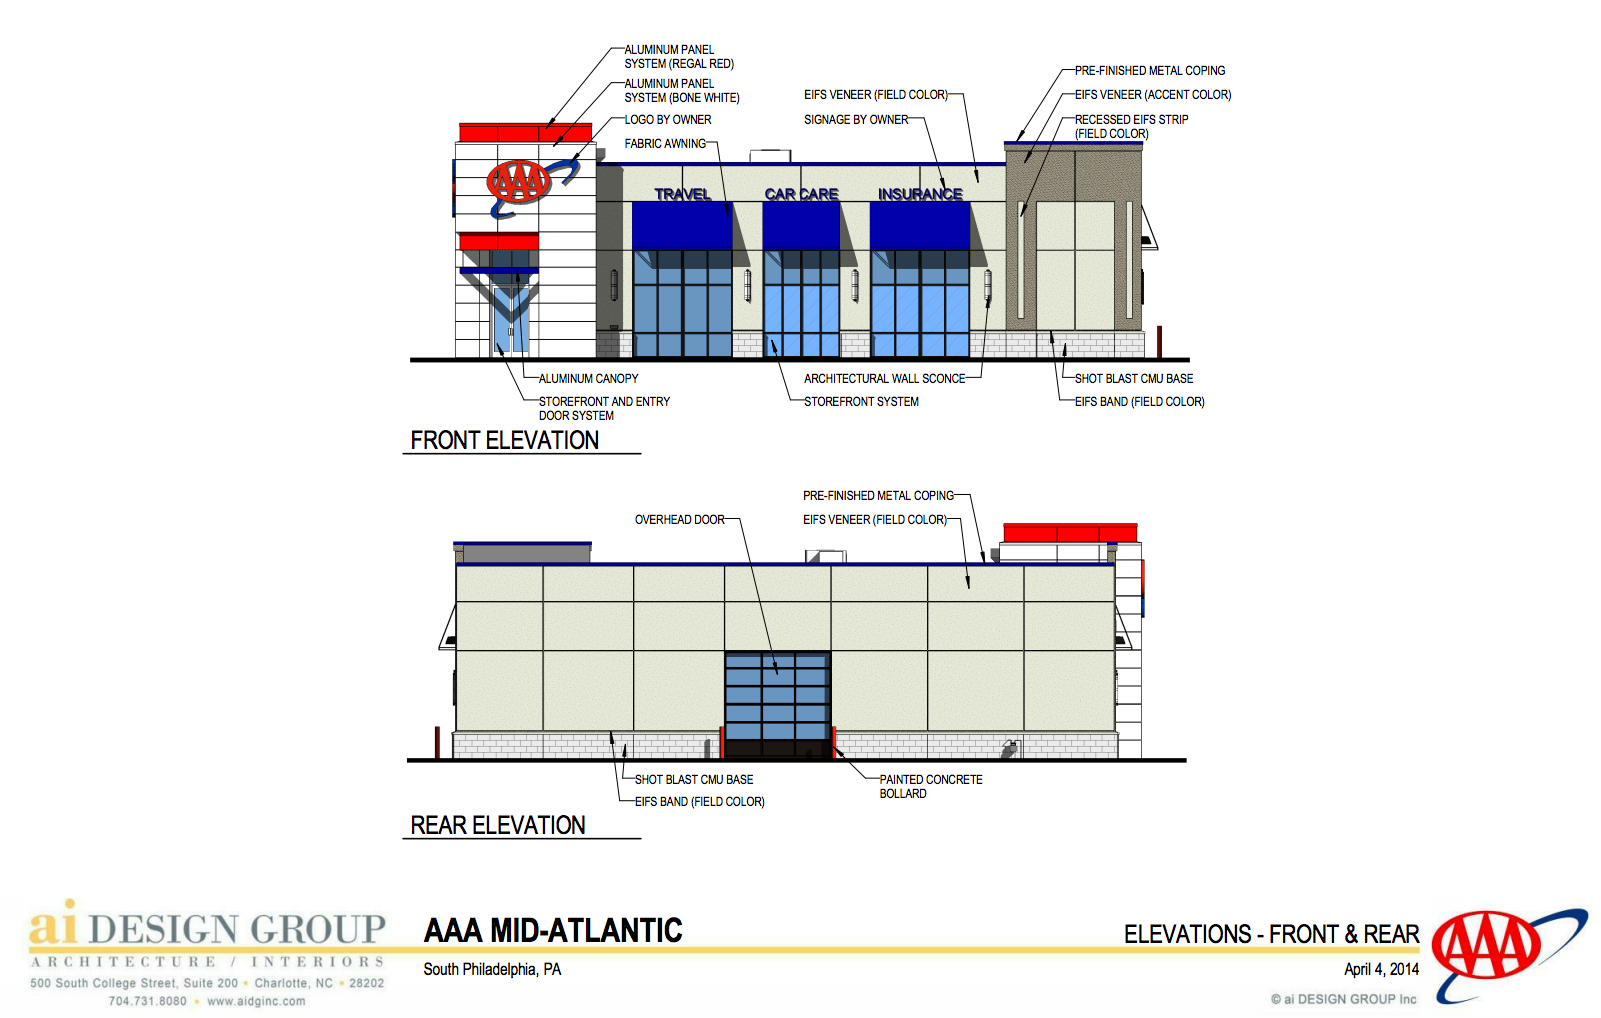 AAA elevations front and rear